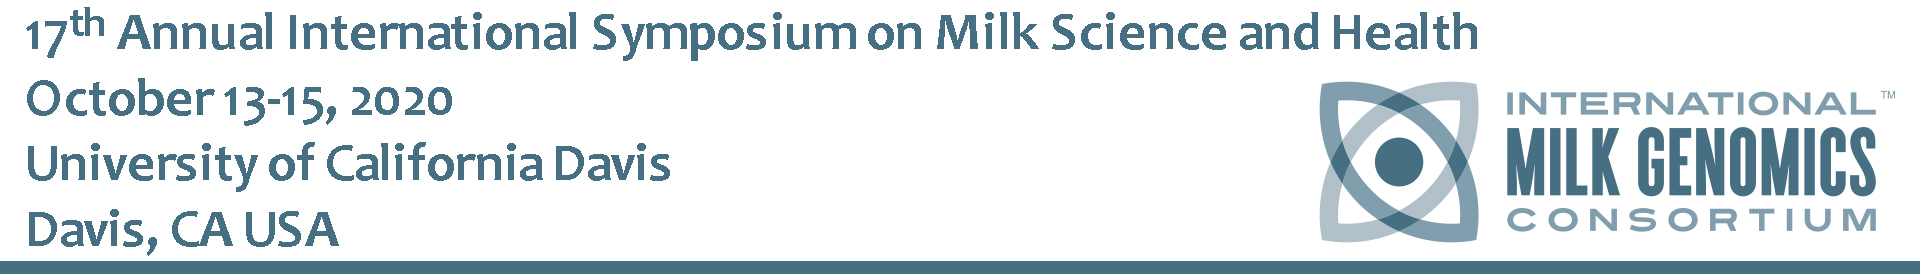 17th Annual International Symposium on Milk Science and Health Event Banner